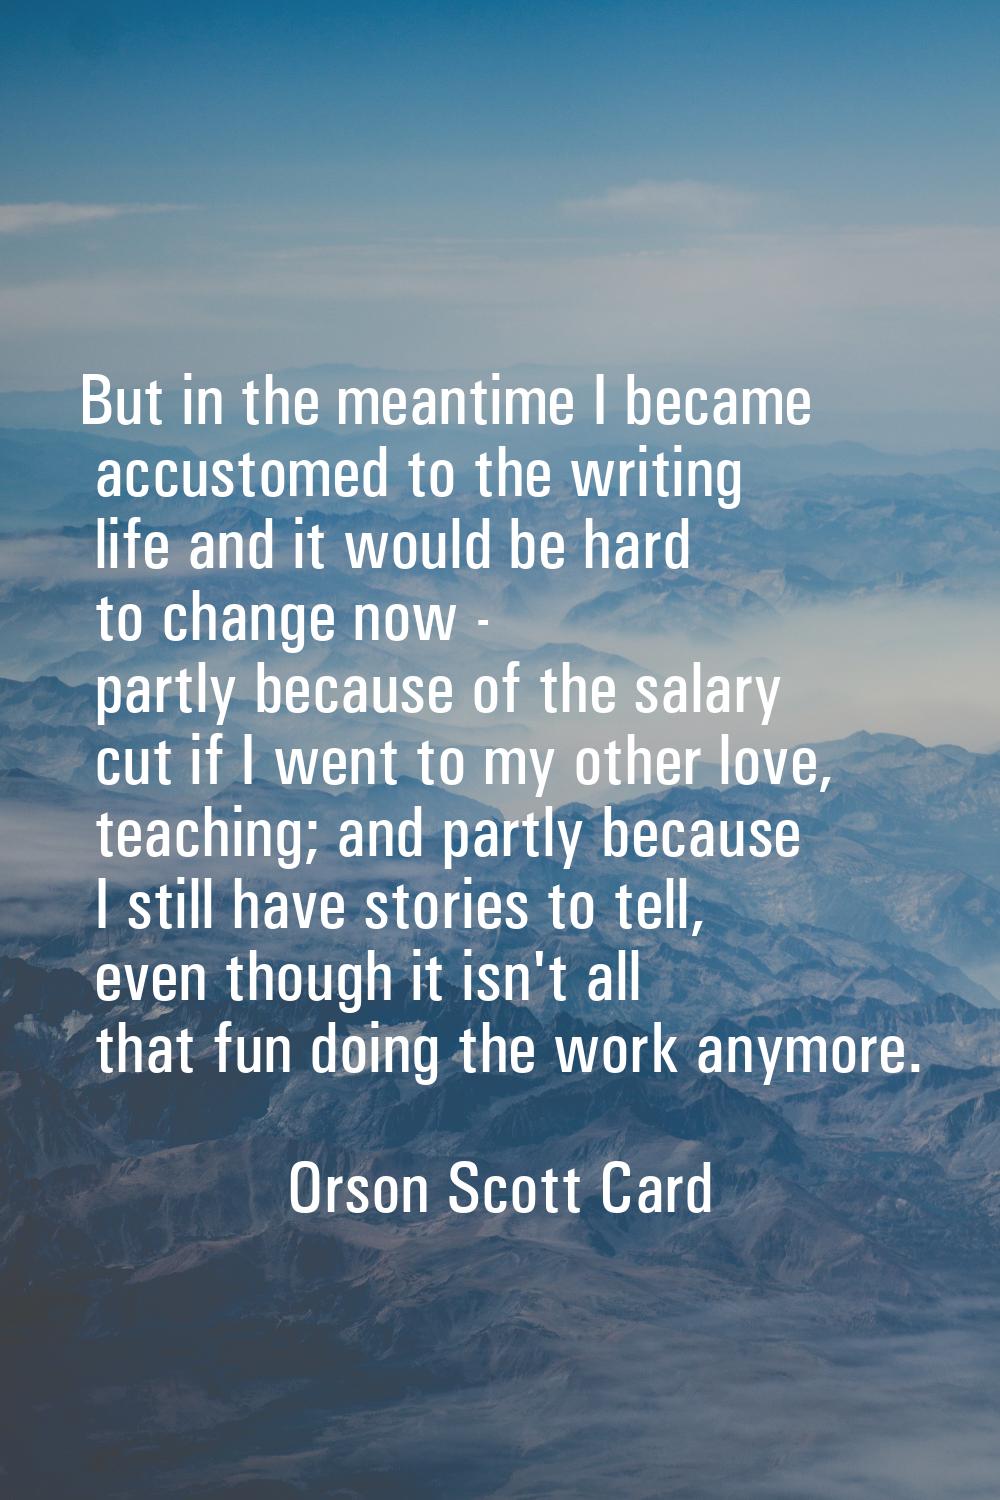 But in the meantime I became accustomed to the writing life and it would be hard to change now - pa